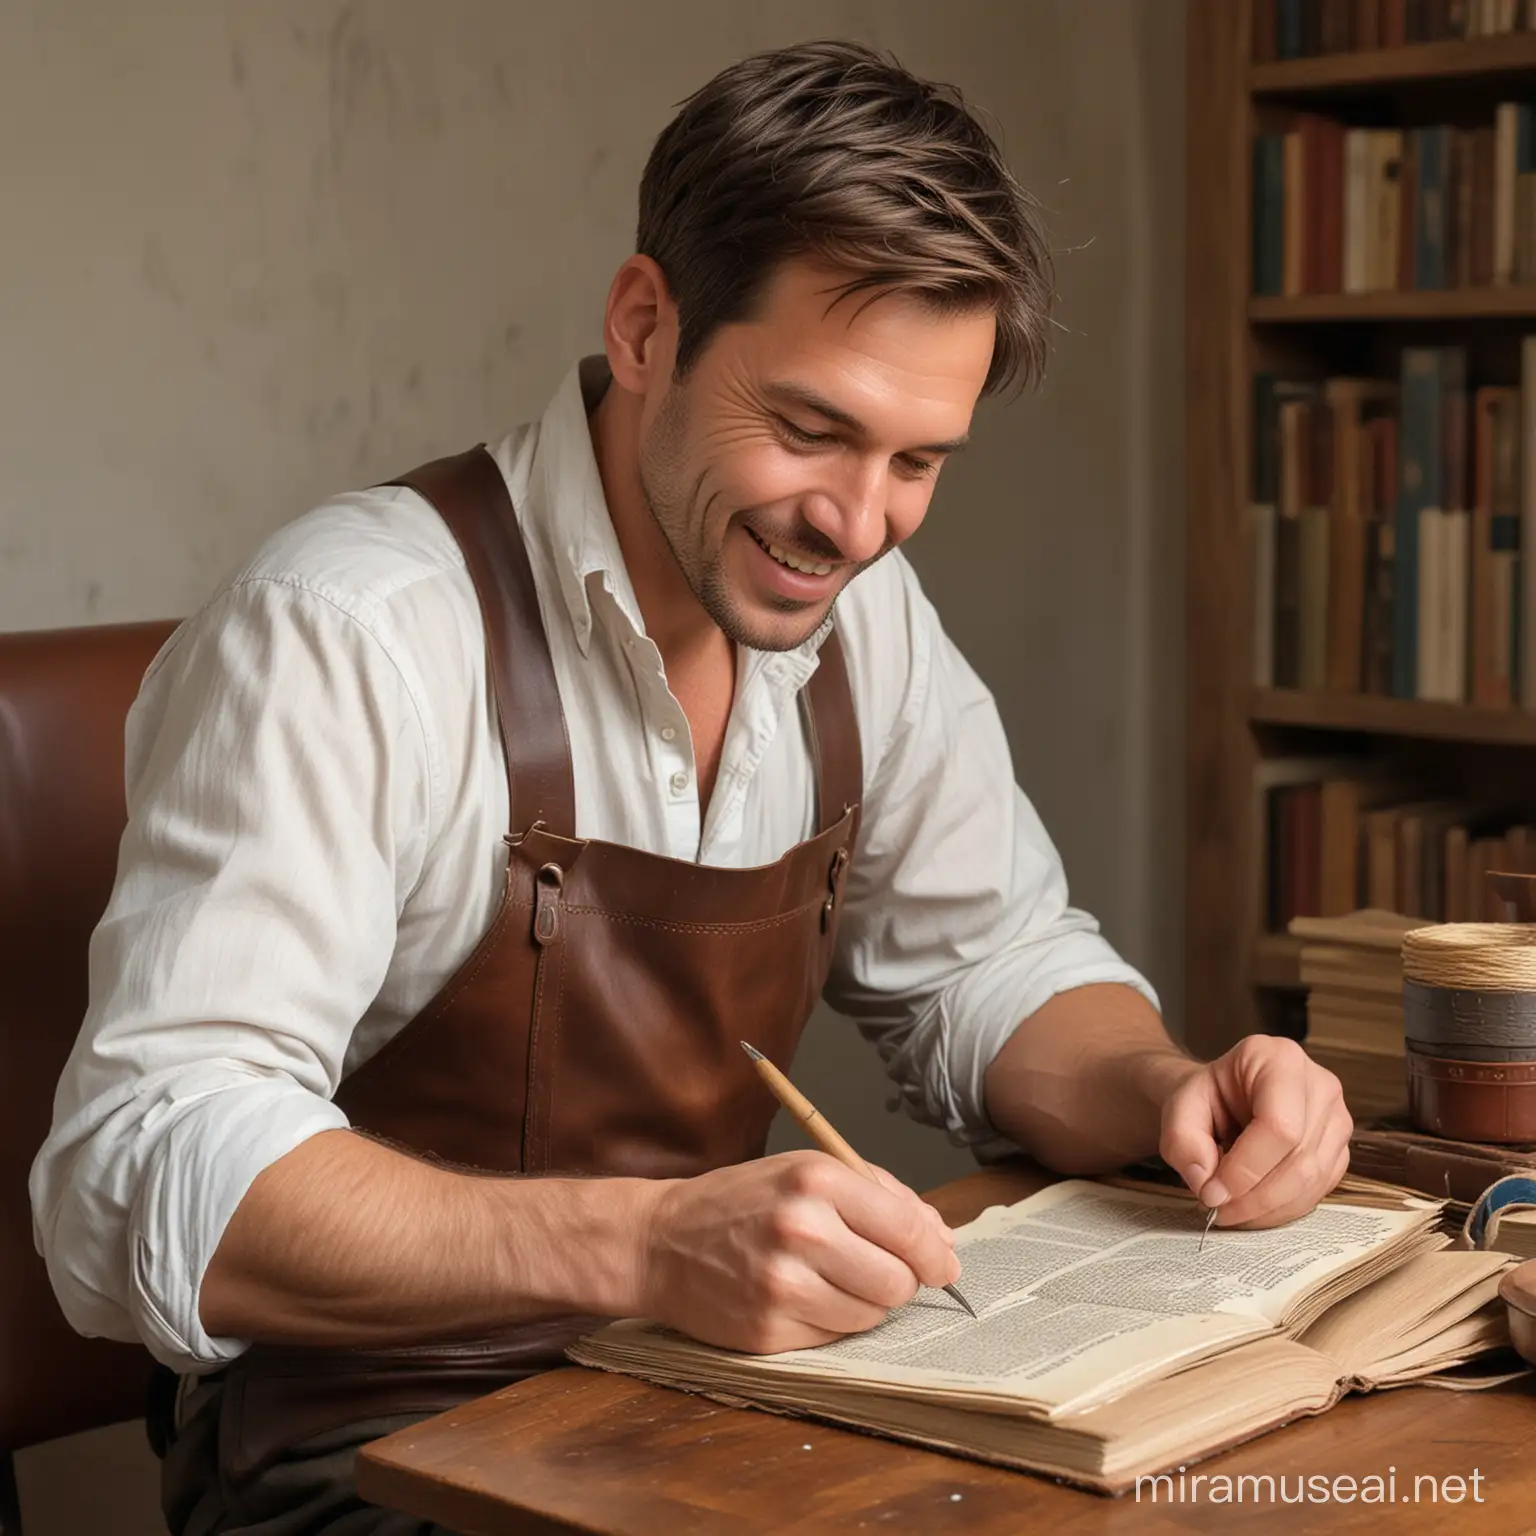 Capture the joy of a man in his early thirties with short brown hair, his warm smile reflecting the satisfaction of practicing the time-honored craft of traditional bookbinding. With careful hands and focused attention, he gracefully works amidst the scent of aged paper and leather, weaving stories into tangible treasures with each turn of the page and stitch of the needle."